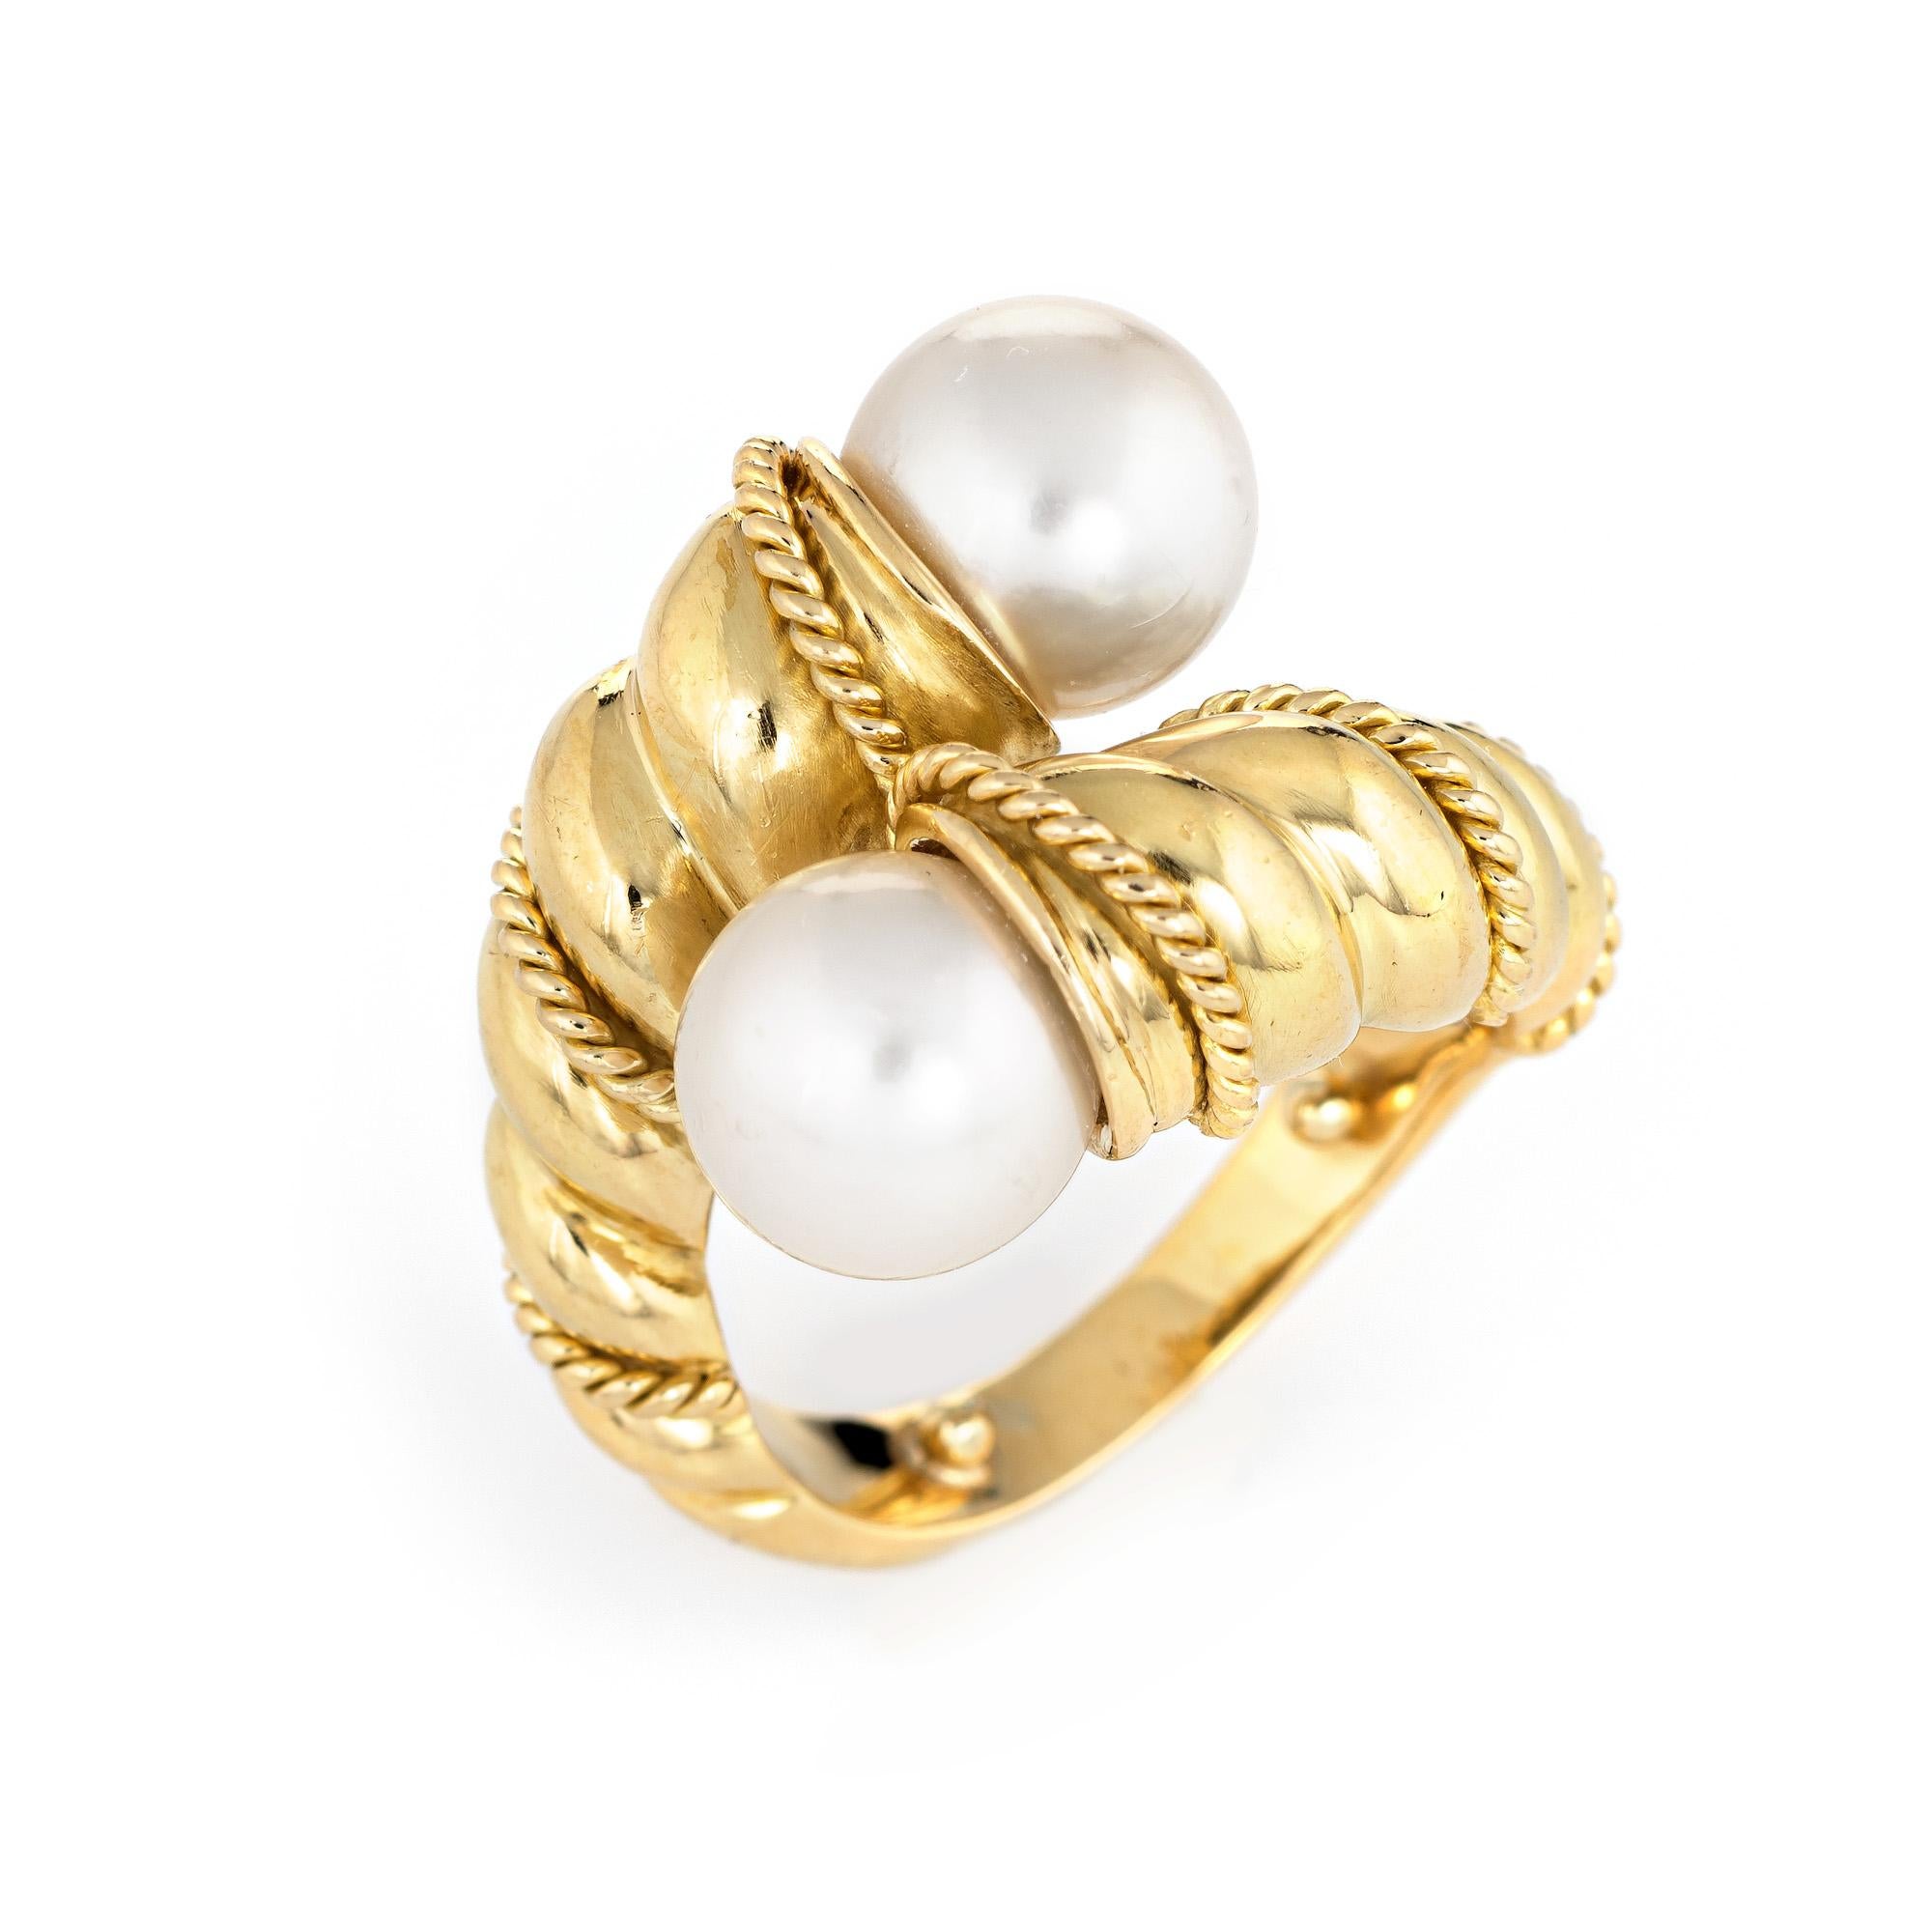 Finely detailed vintage Tiffany & Co cultured pearl bypass ring (circa 1990s) crafted in 18 karat yellow gold. 

Two cultured pearls each measure 8mm. The pearls are lustrous and show rose overtones.  

The stylish ring features a bypass design with